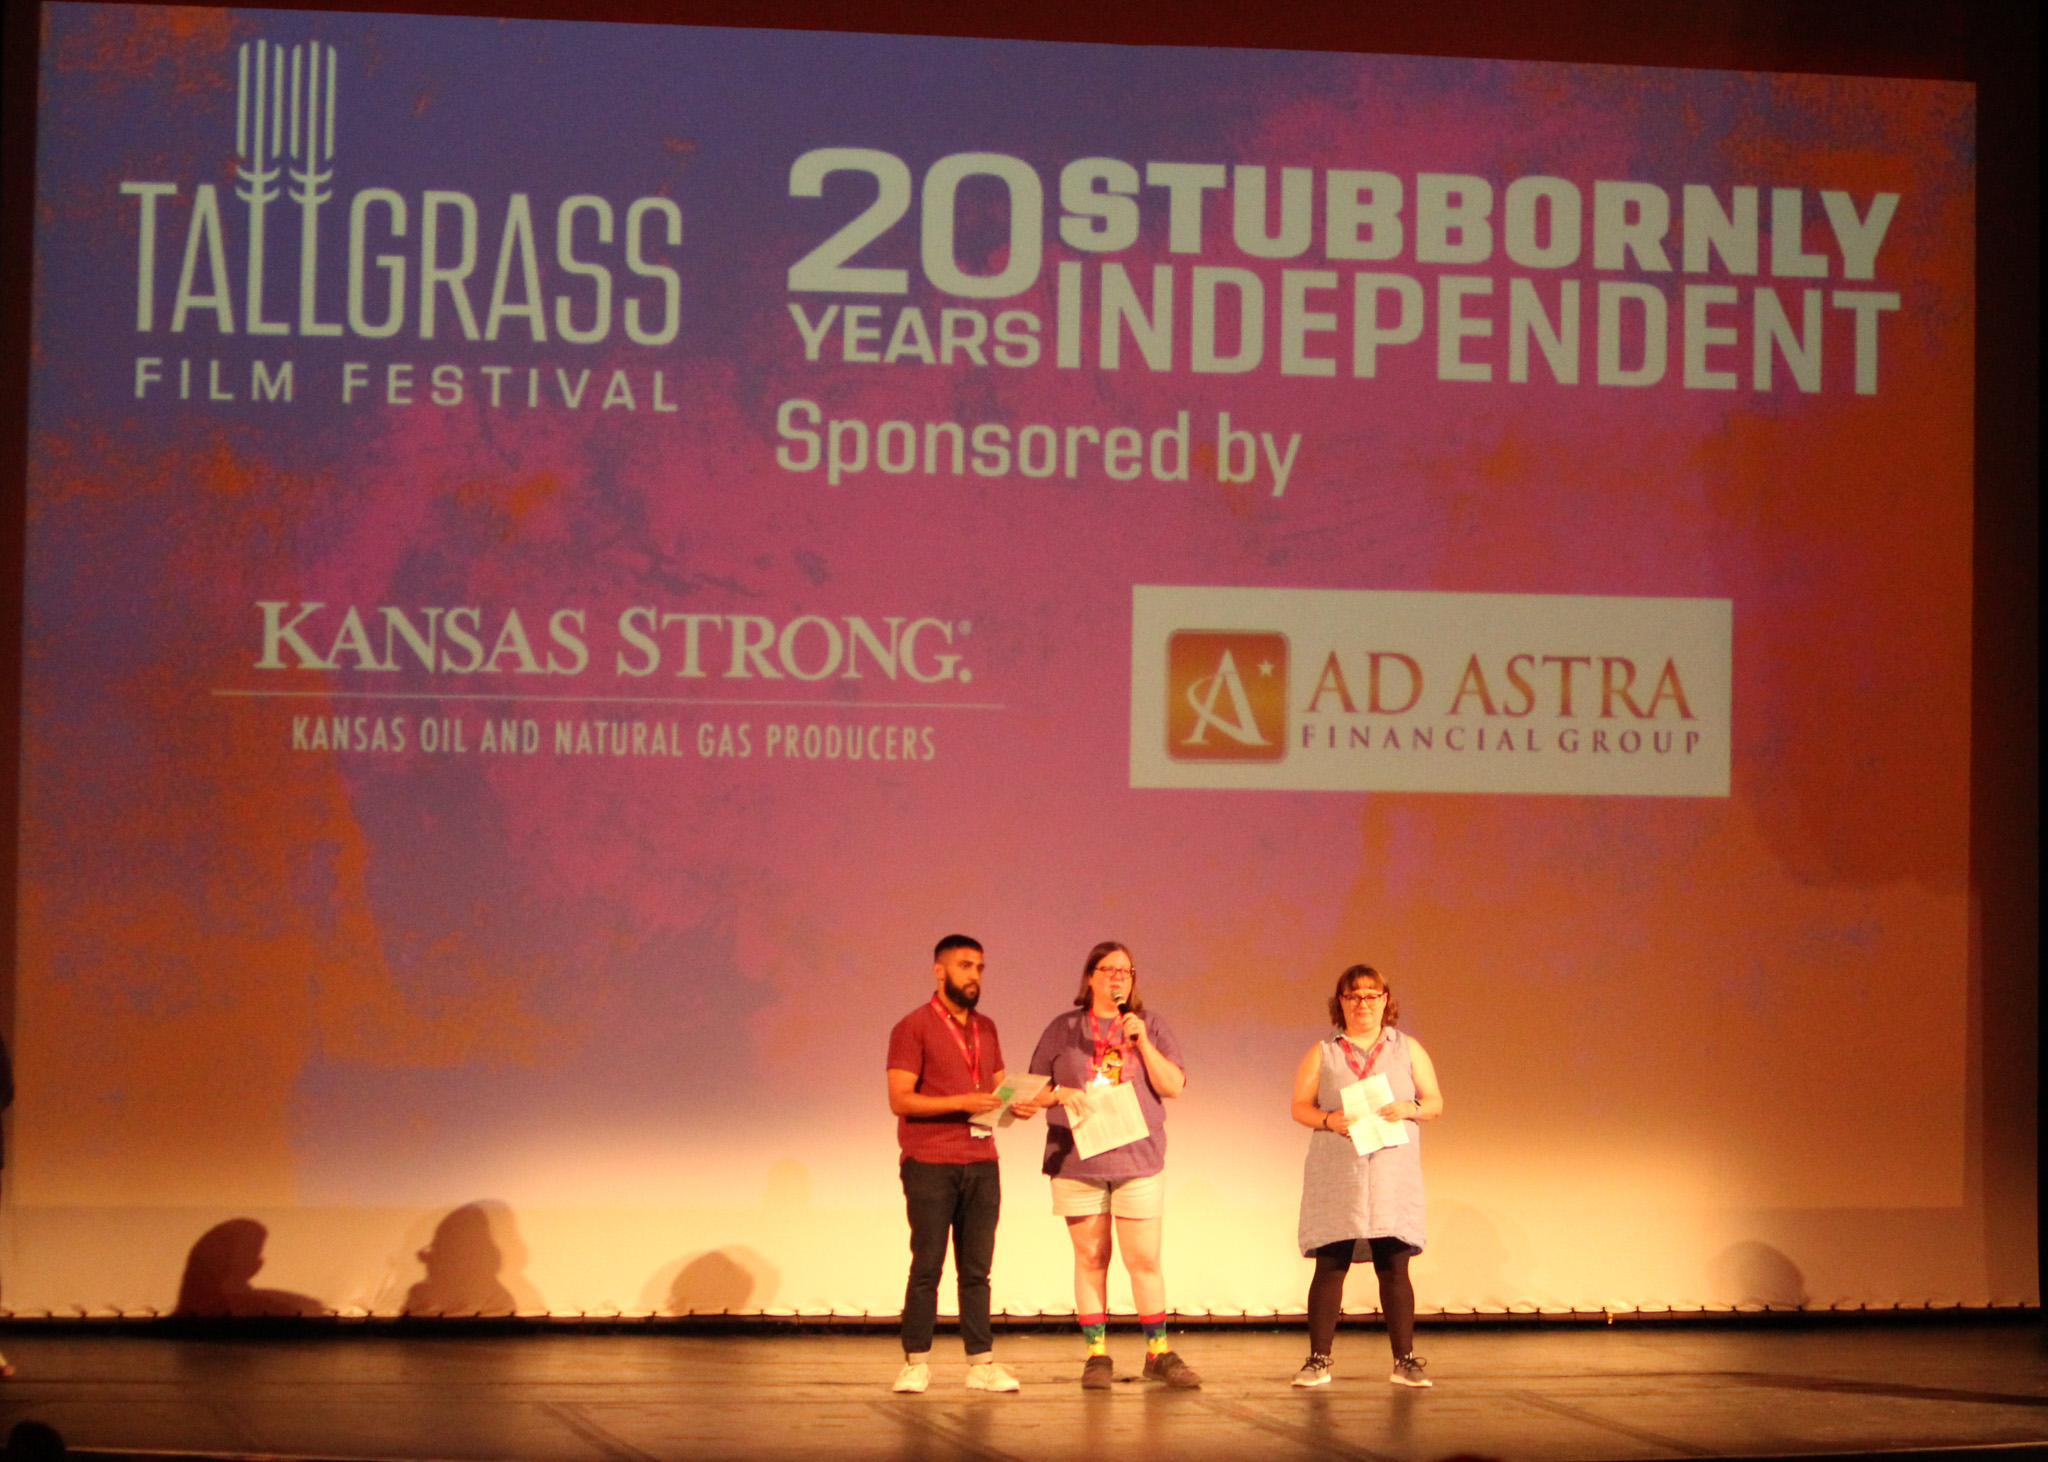 Three people stand on a stage in front of a large screen that has a sponsor logo